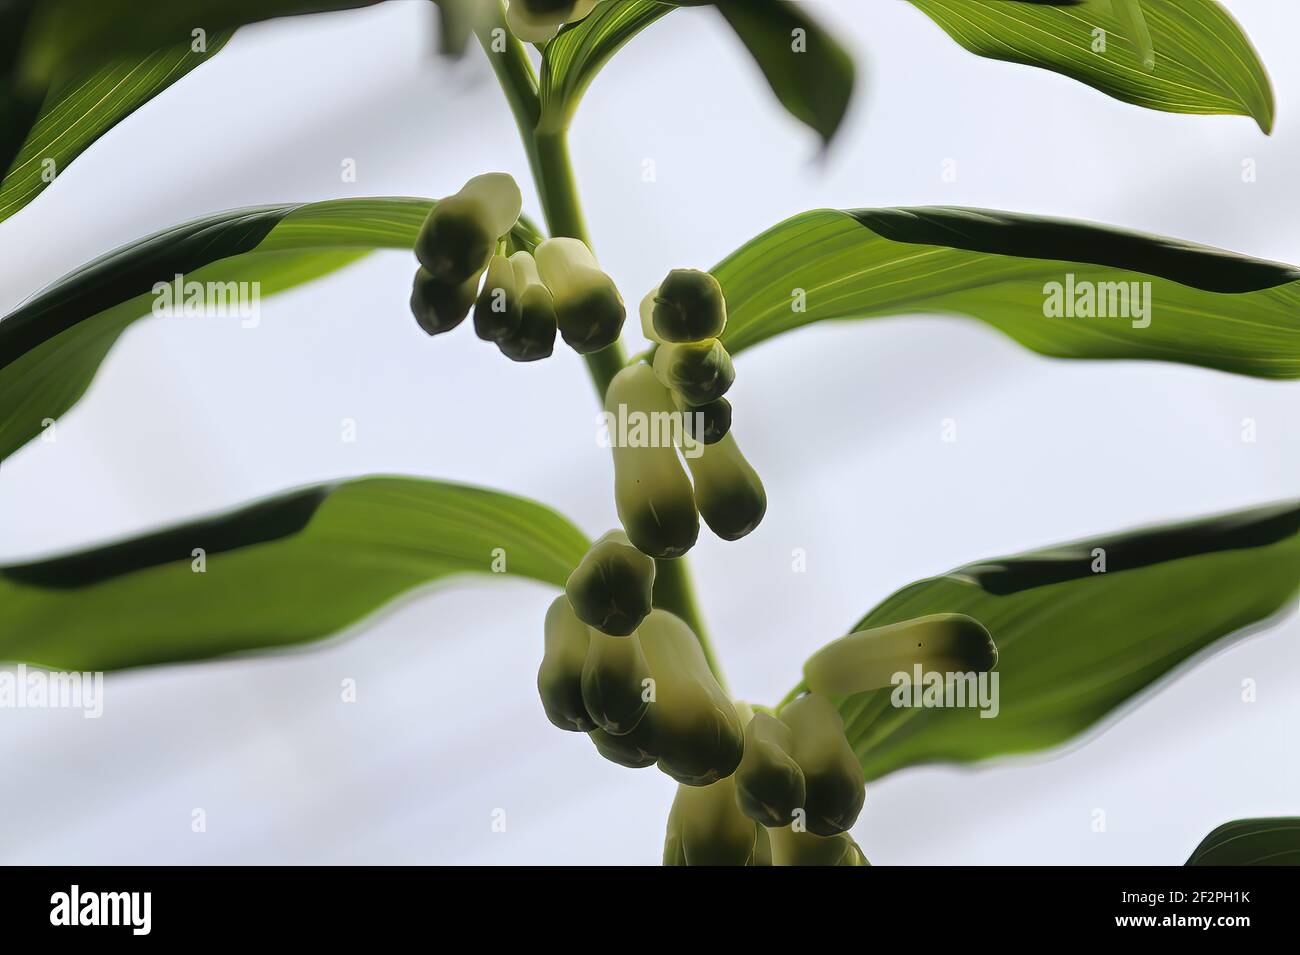 Bottom view of looking up at solomons seal flower buds Stock Photo